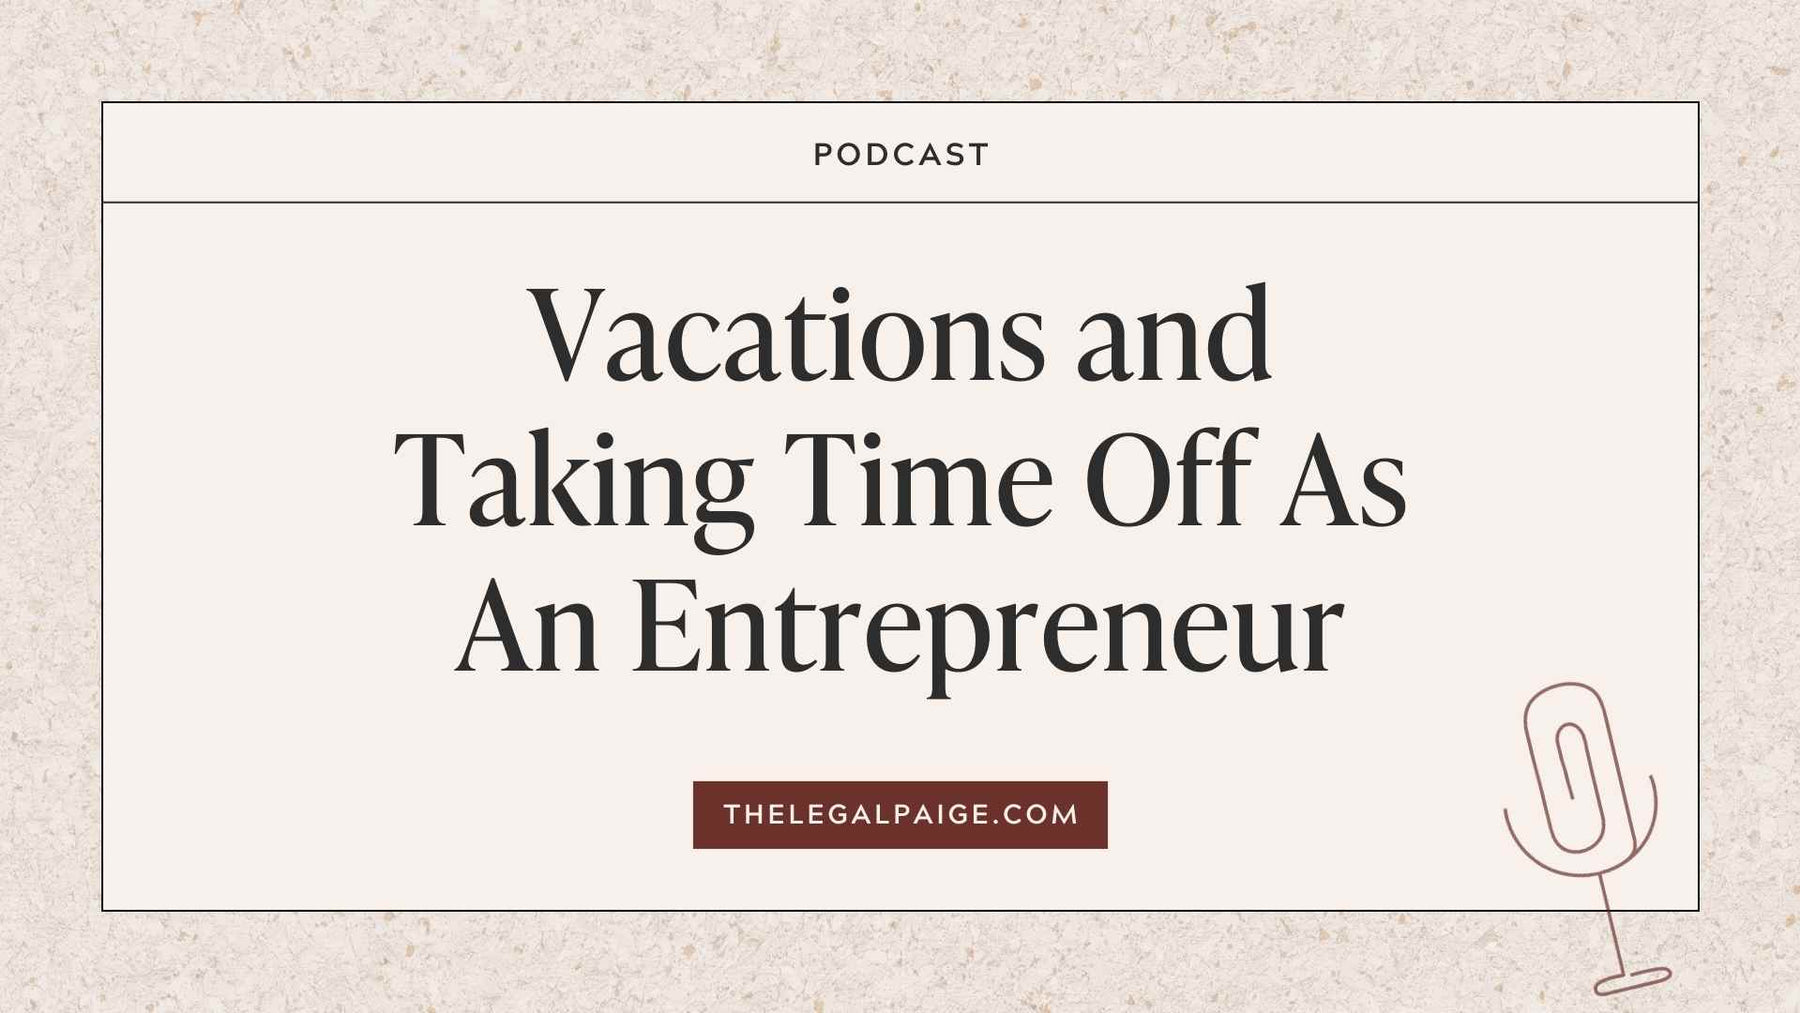 Episode 117: Vacations and Taking Time Off As An Entrepreneur